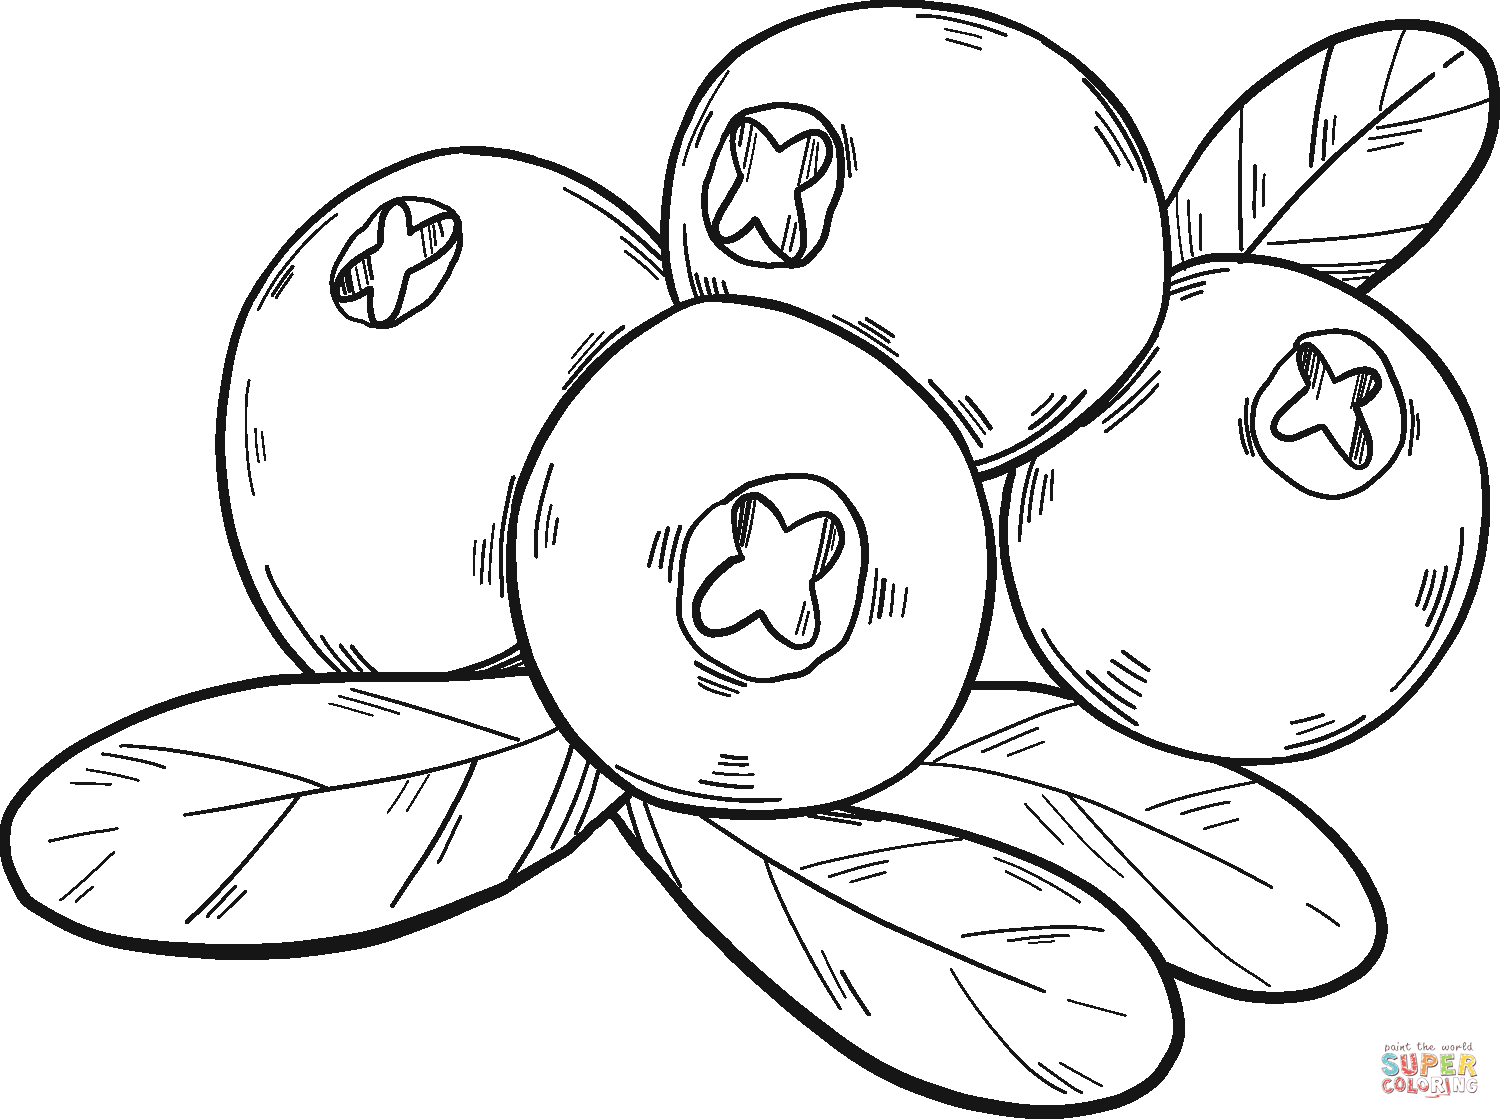 Cranberries coloring page free printable coloring pages